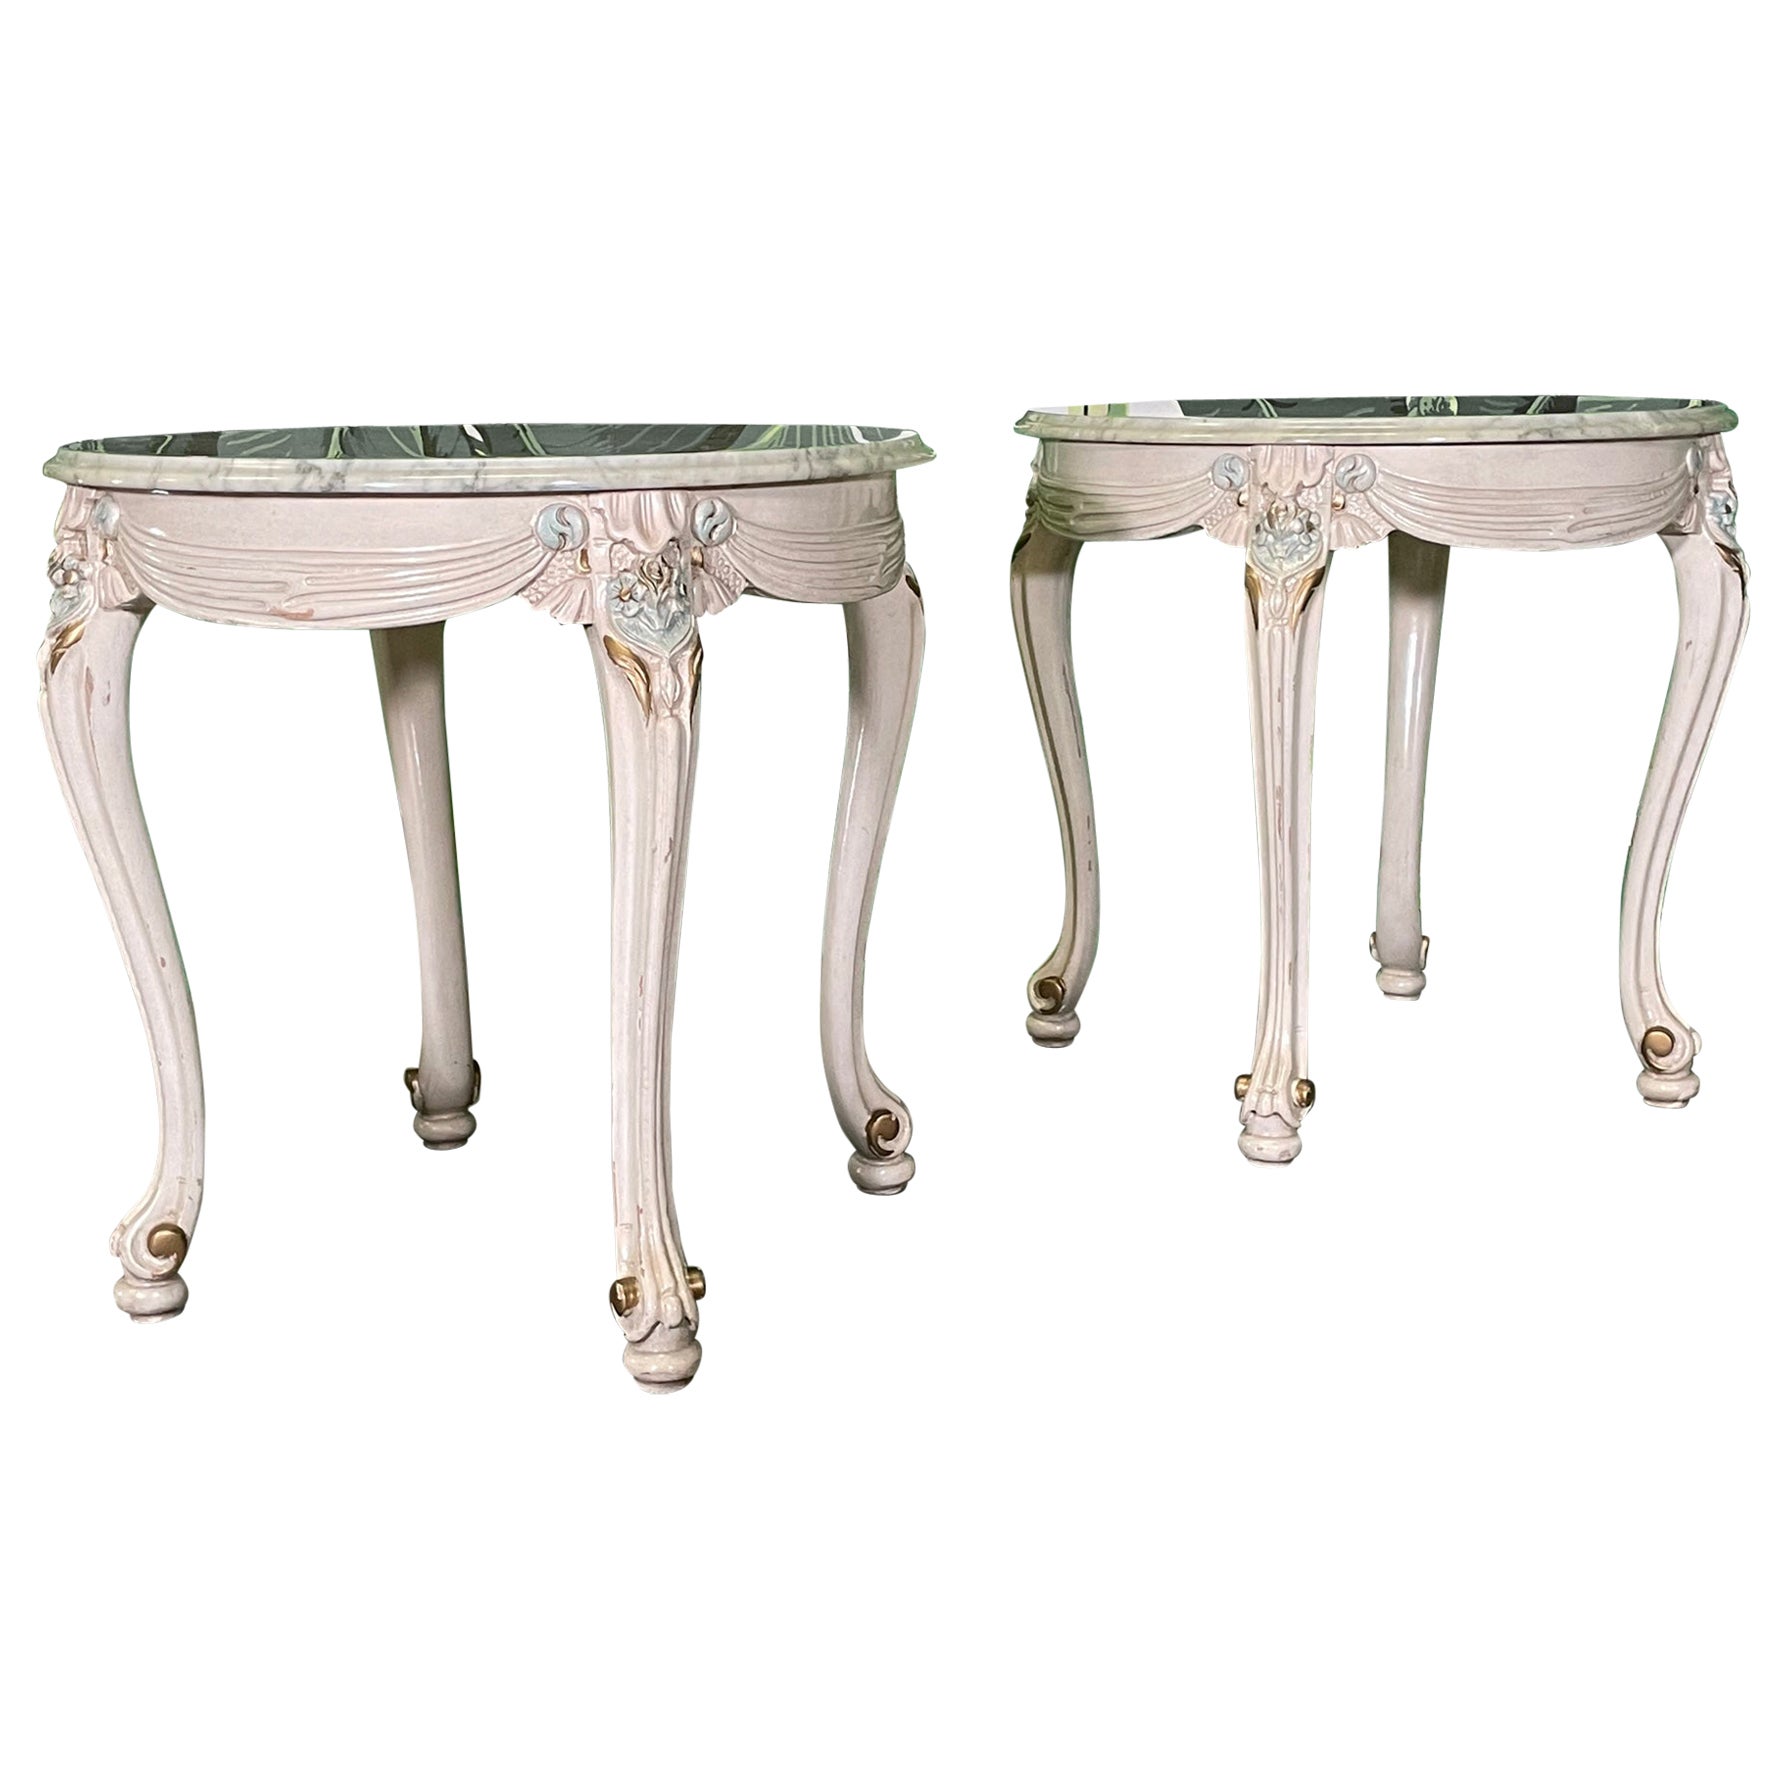 Neoclassic Marble Top End Tables, a Pair For Sale